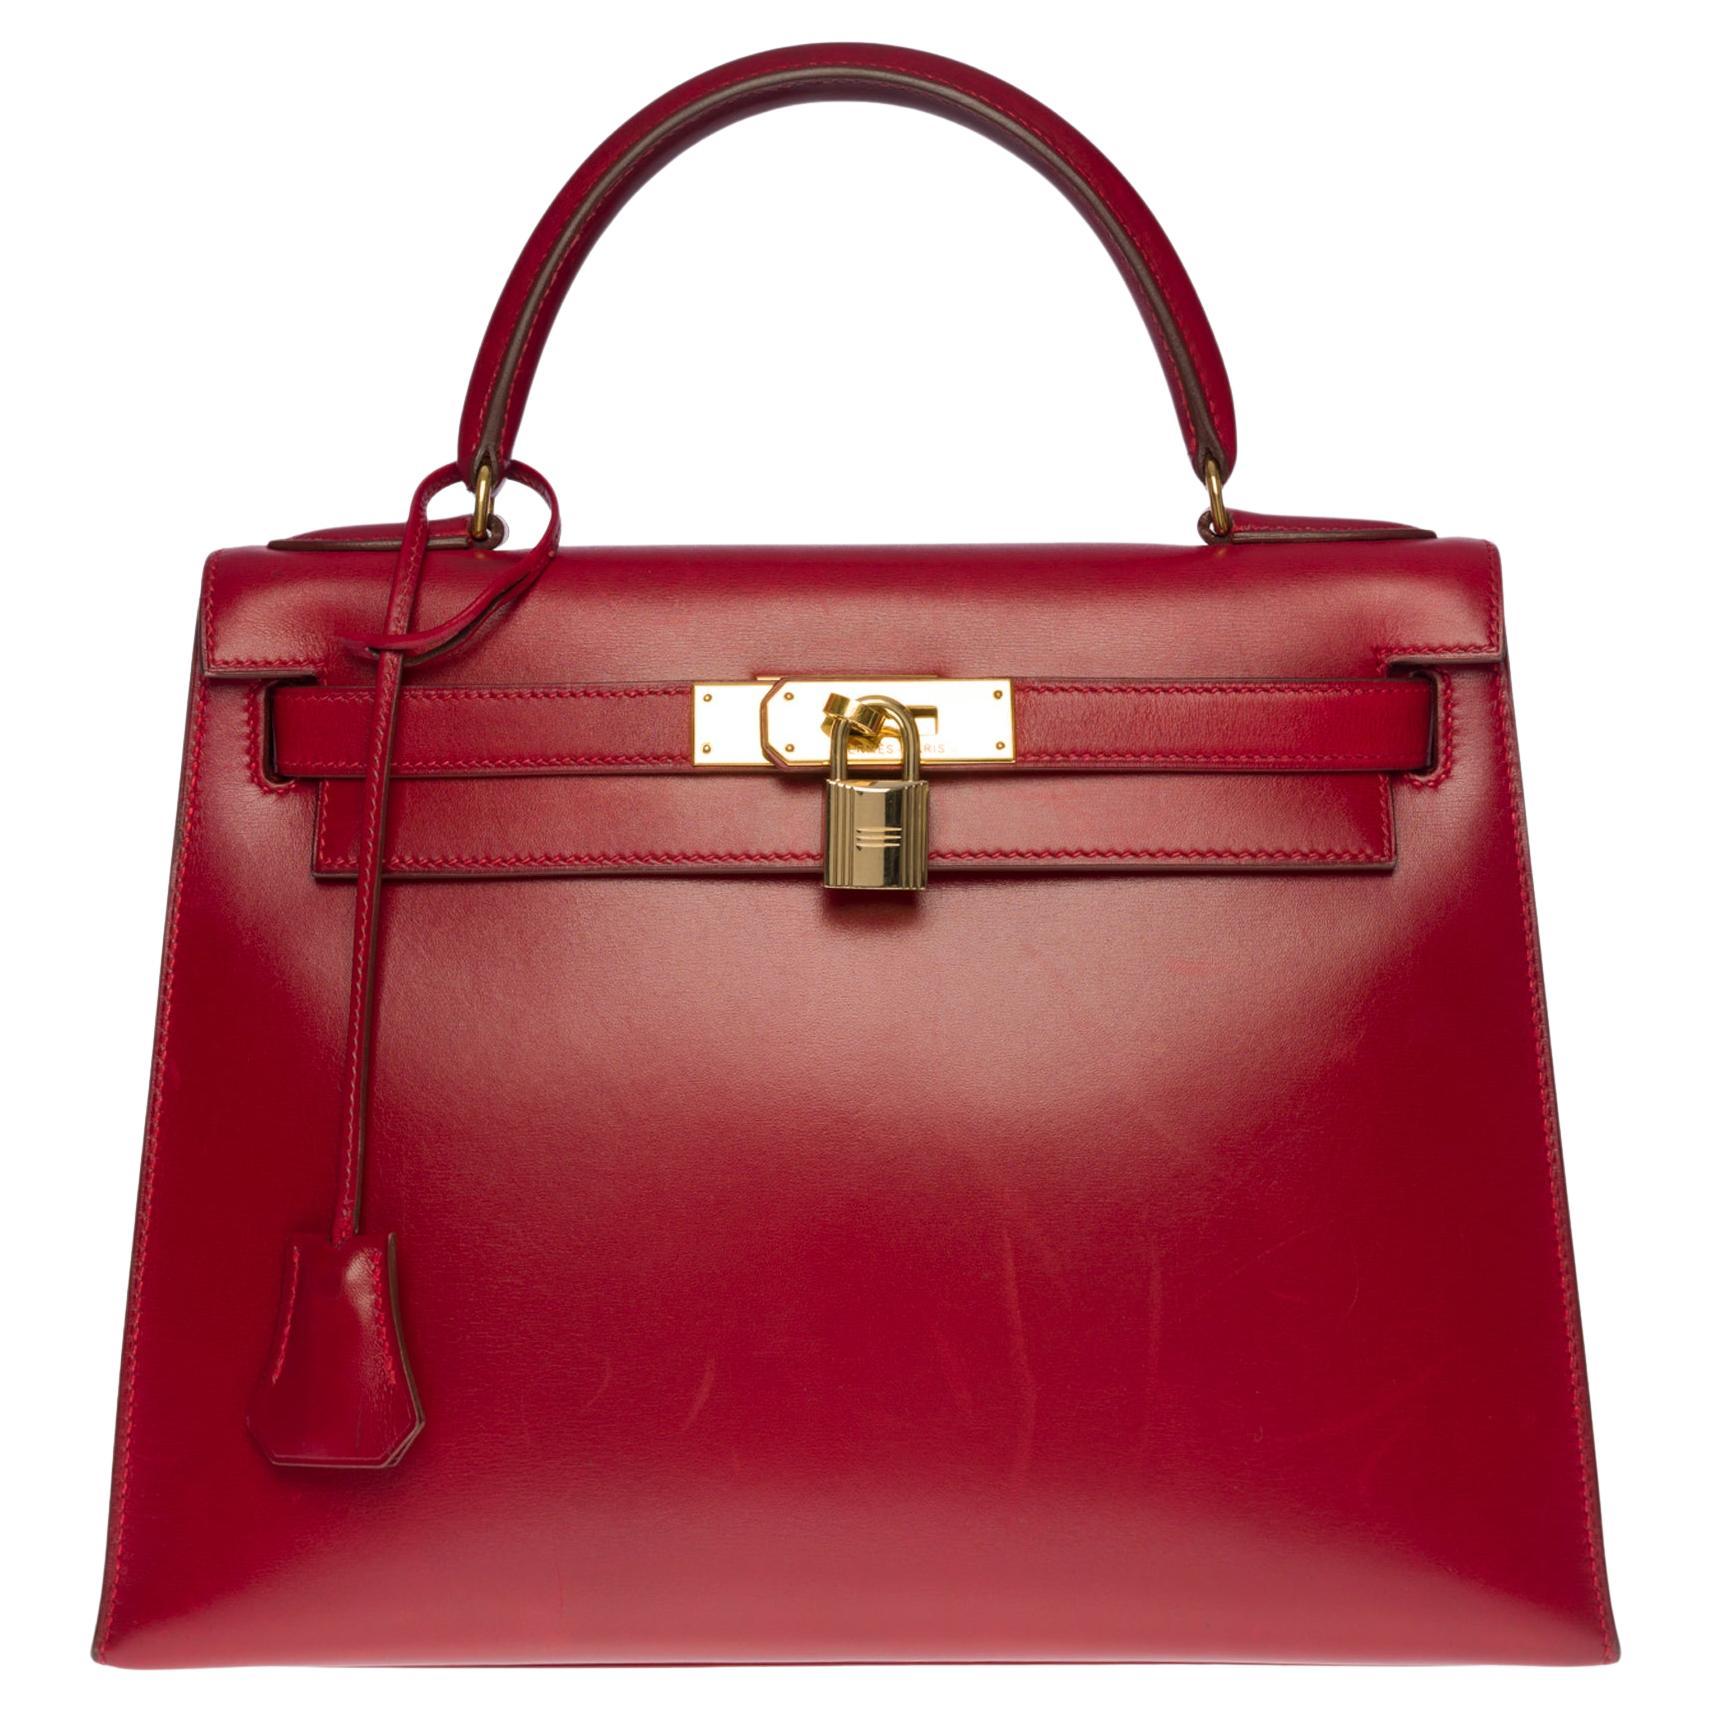 Exceptional Hermes Kelly 28 sellier handbag in Rouge H box calfskin leather, GHW